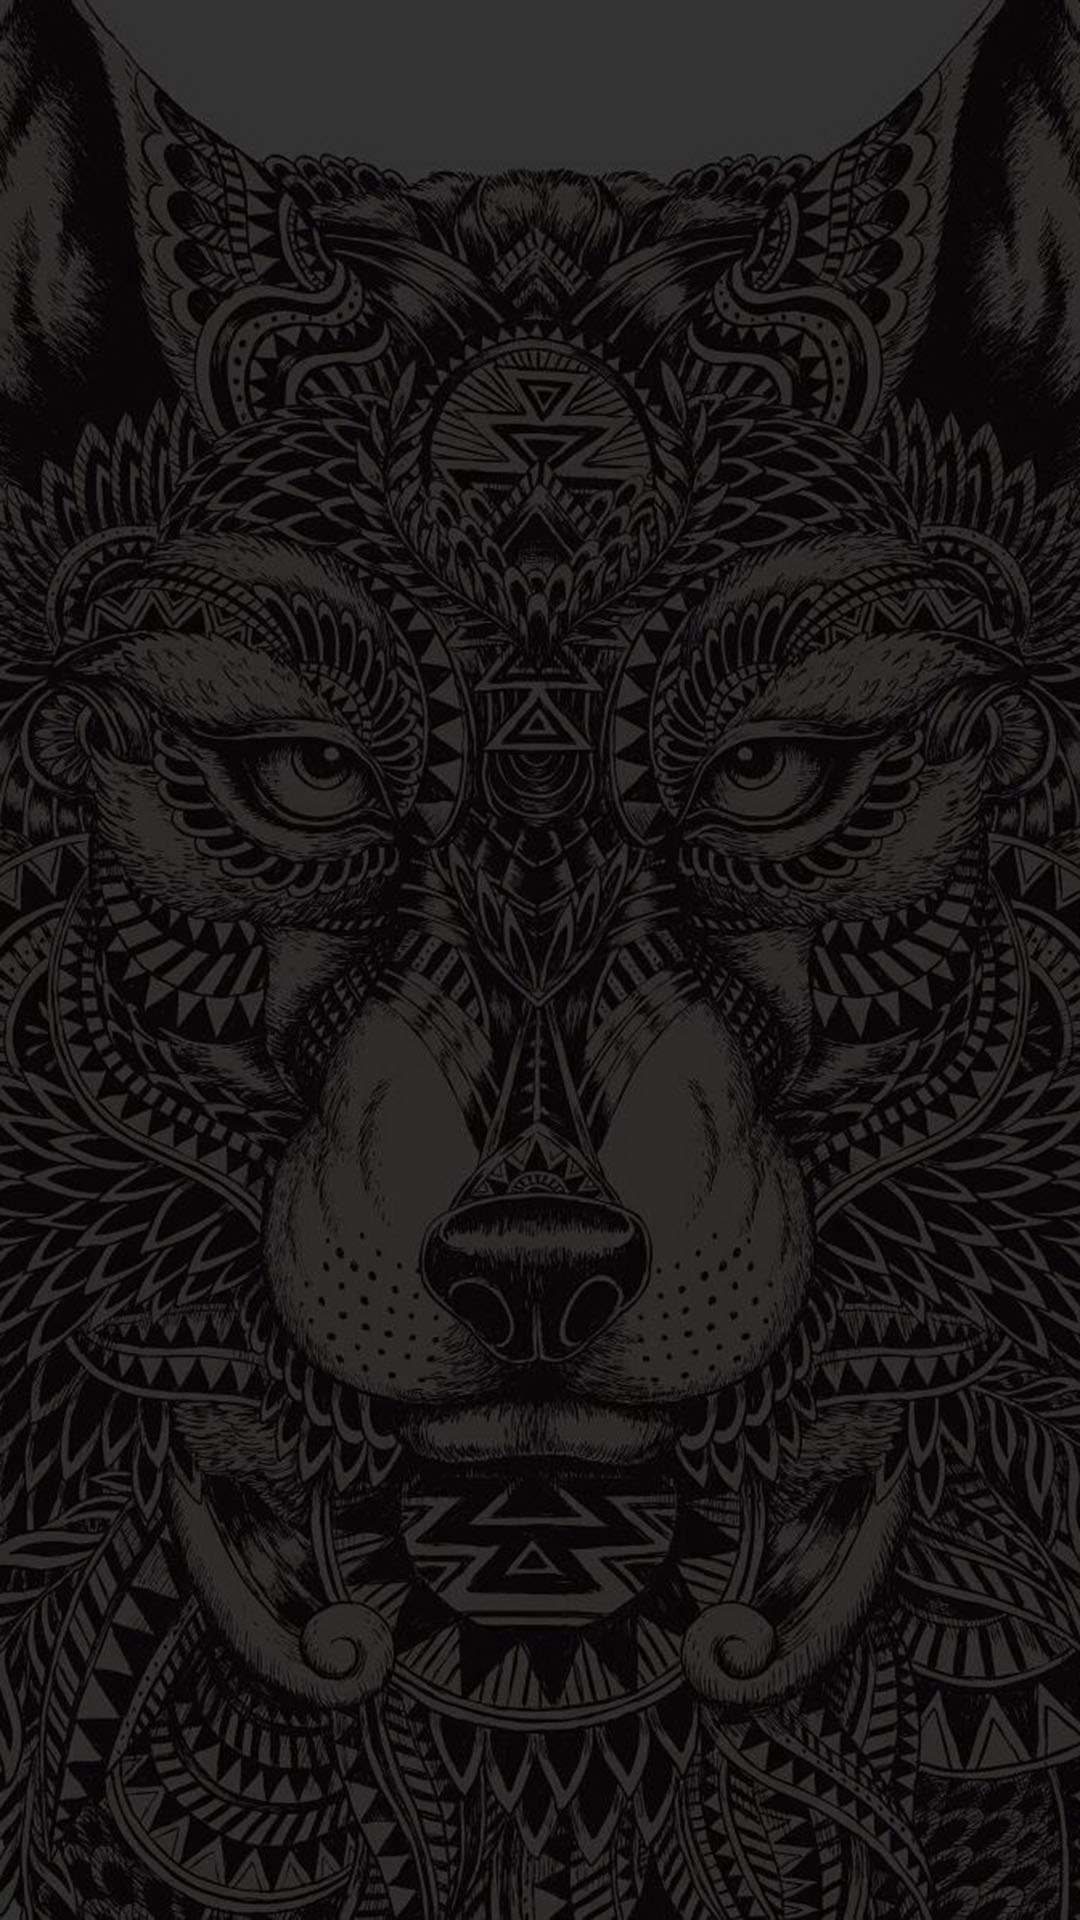 1080x1920 Explore Iphone Wallpaper Tribal, Wolf Wallpaper, and more!